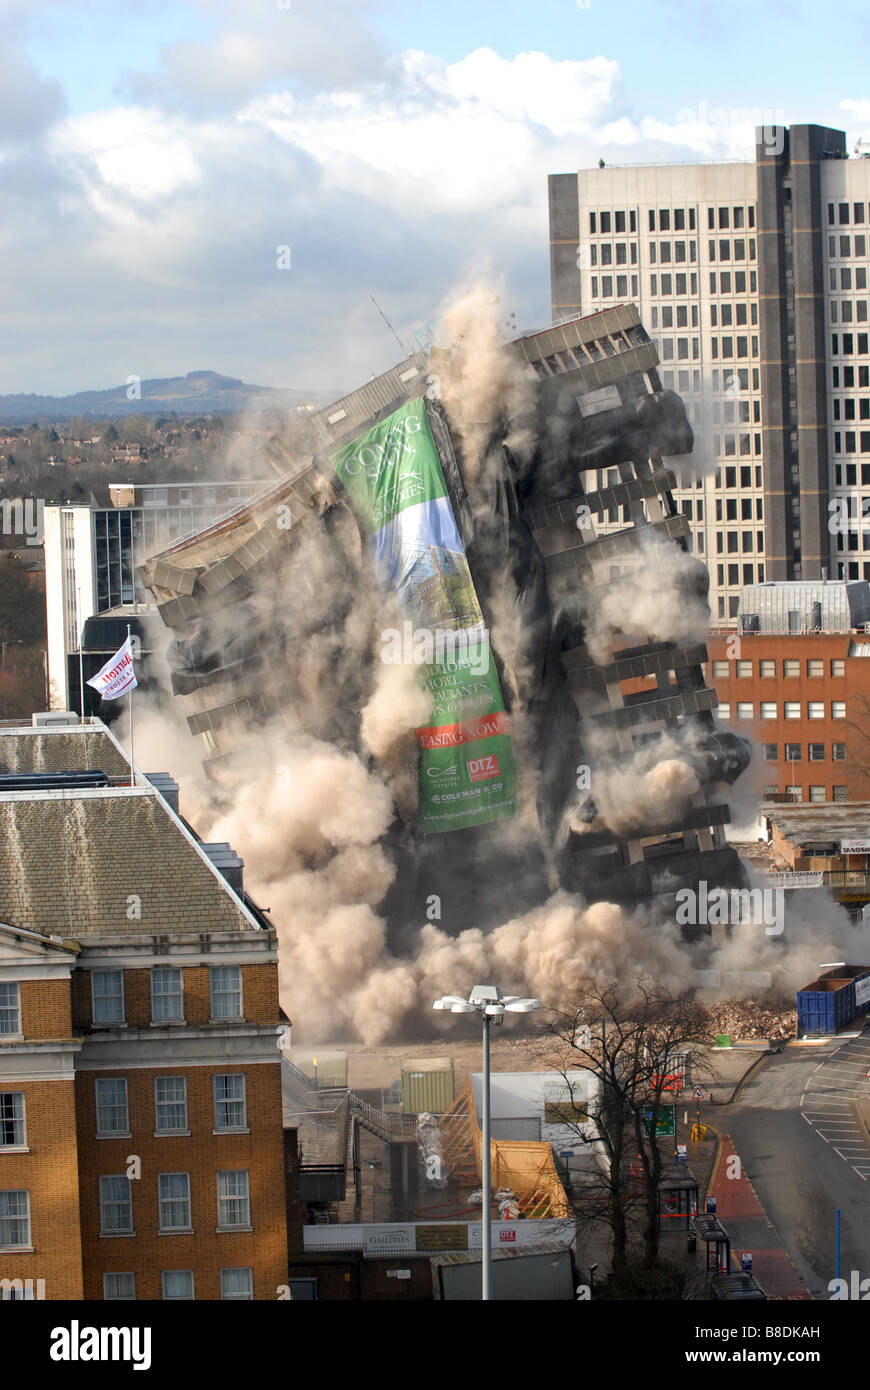 Fiveways Birmingham demolition of Edgbaston Shopping Centre and offices with explosives Stock Photo